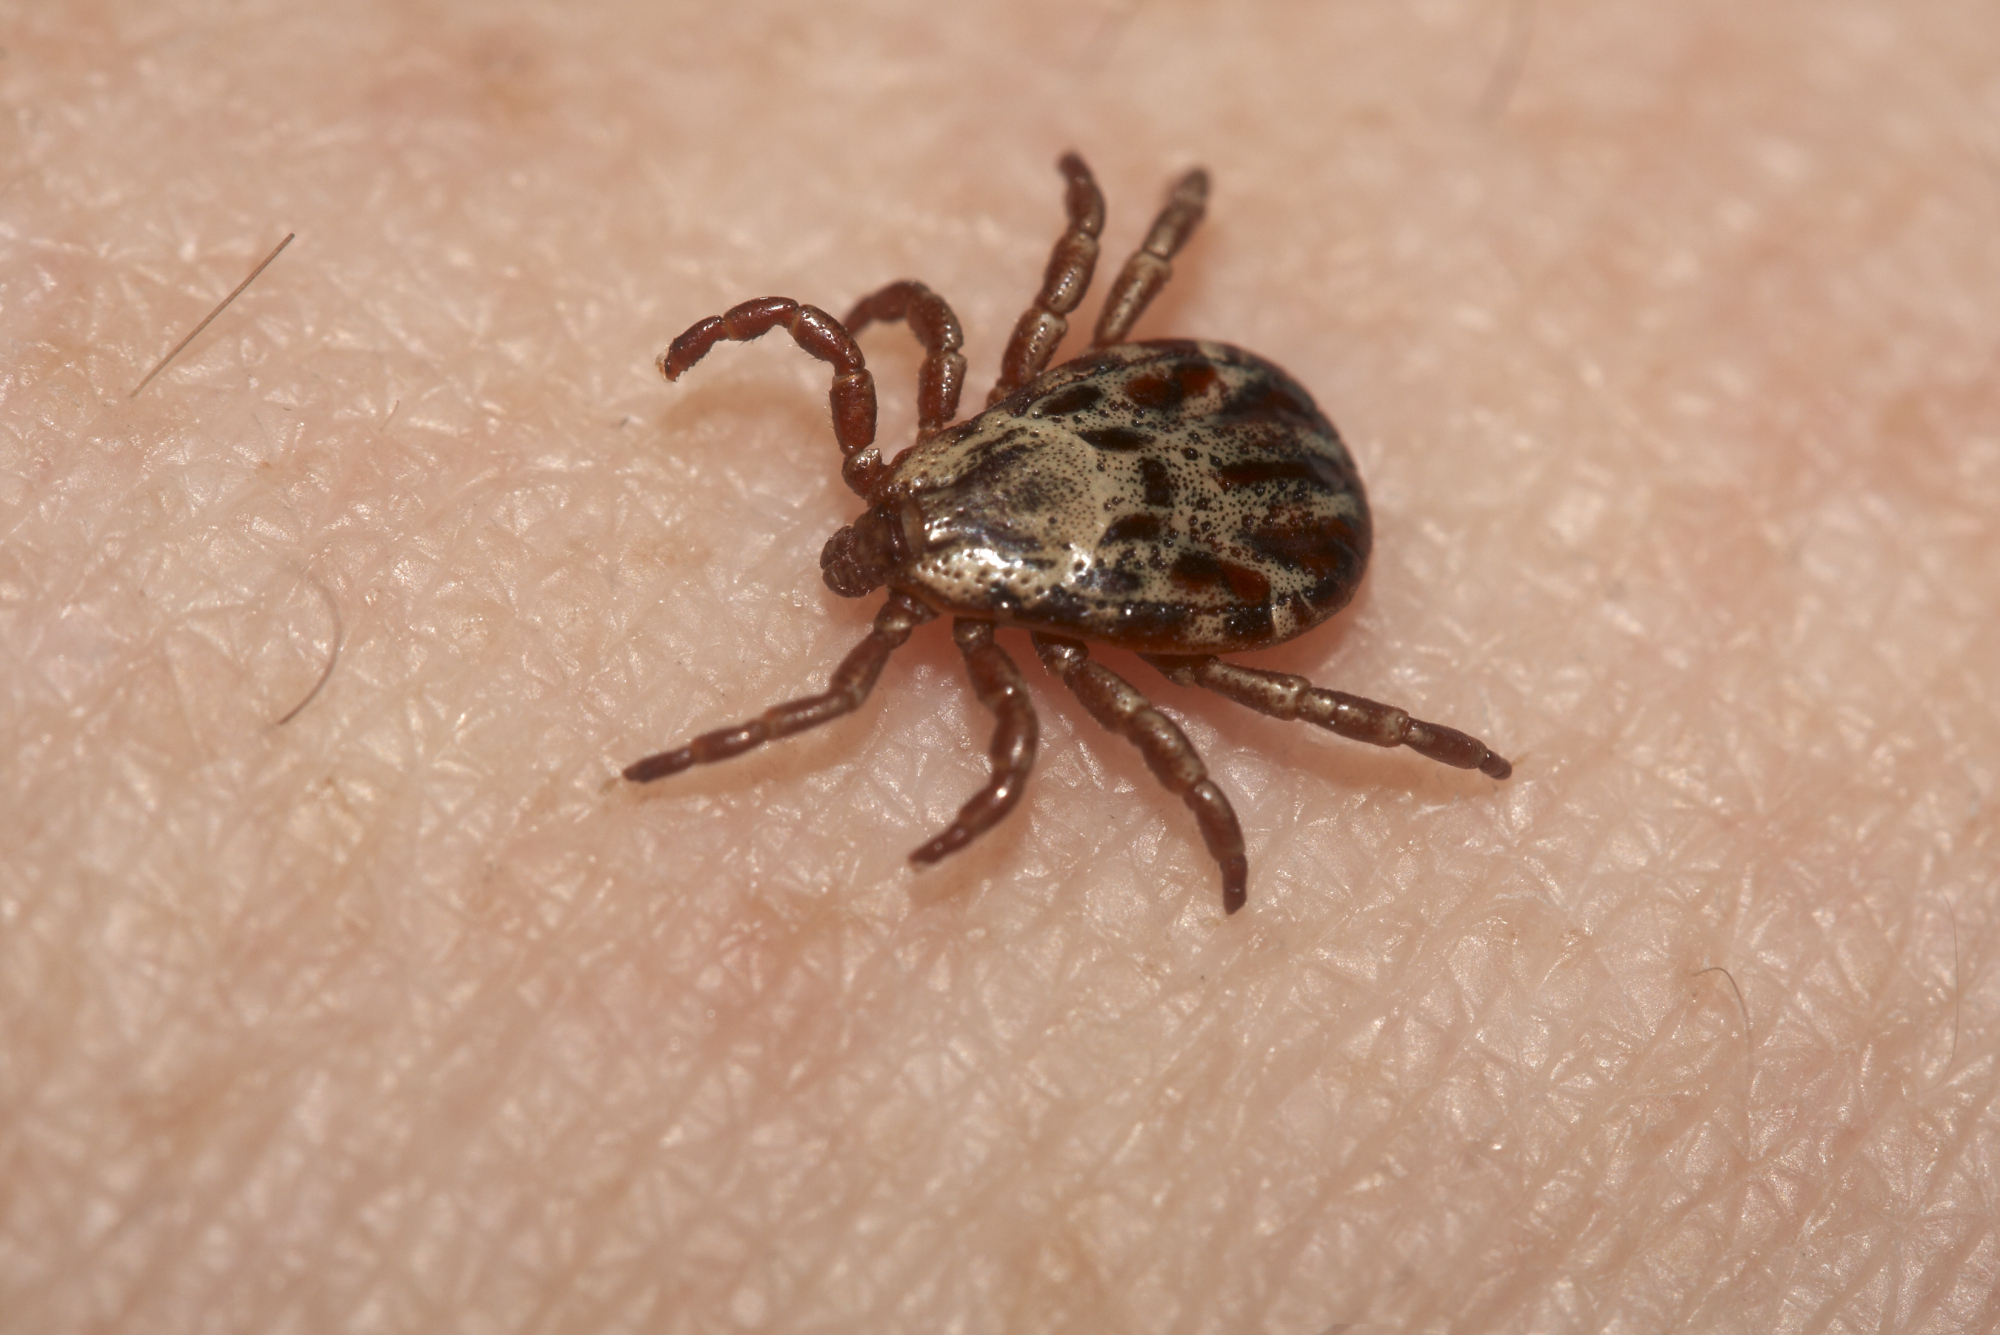 Medical experts are urging caution amid a rising number of potentially fatal infections that can be contracted through tick bites. | ISTOCK